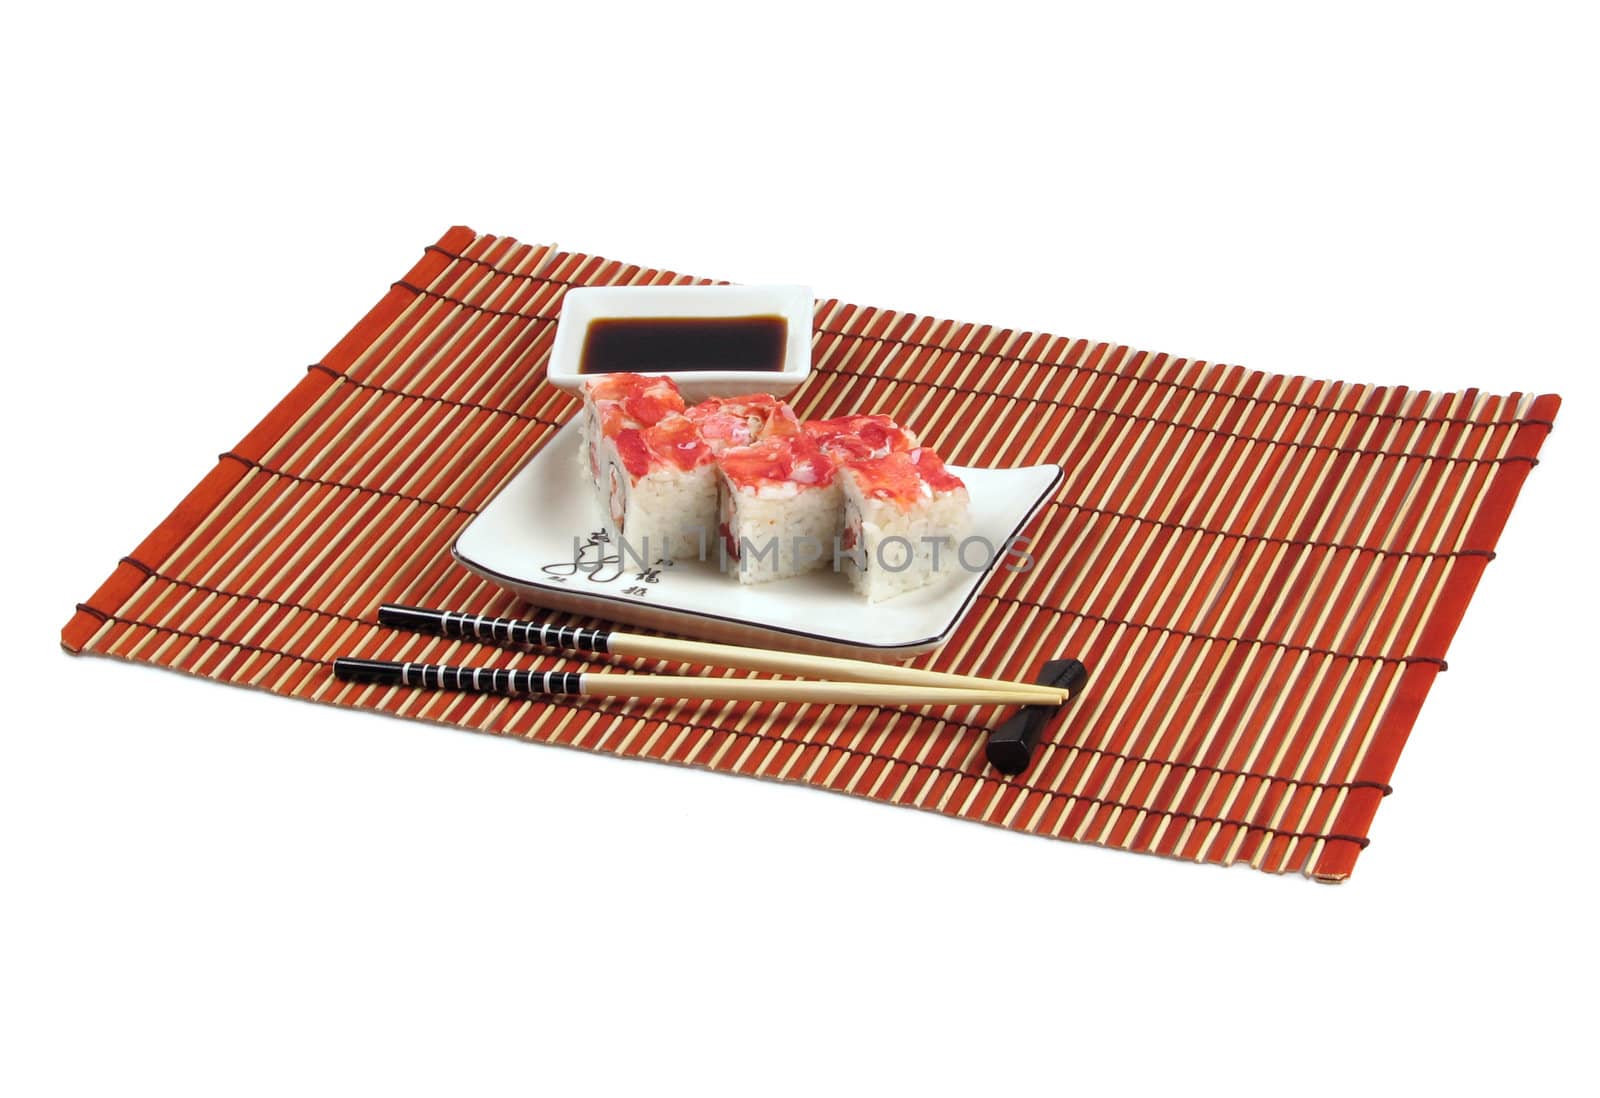 sushi dinner are located on bamboo mat by Svetovid